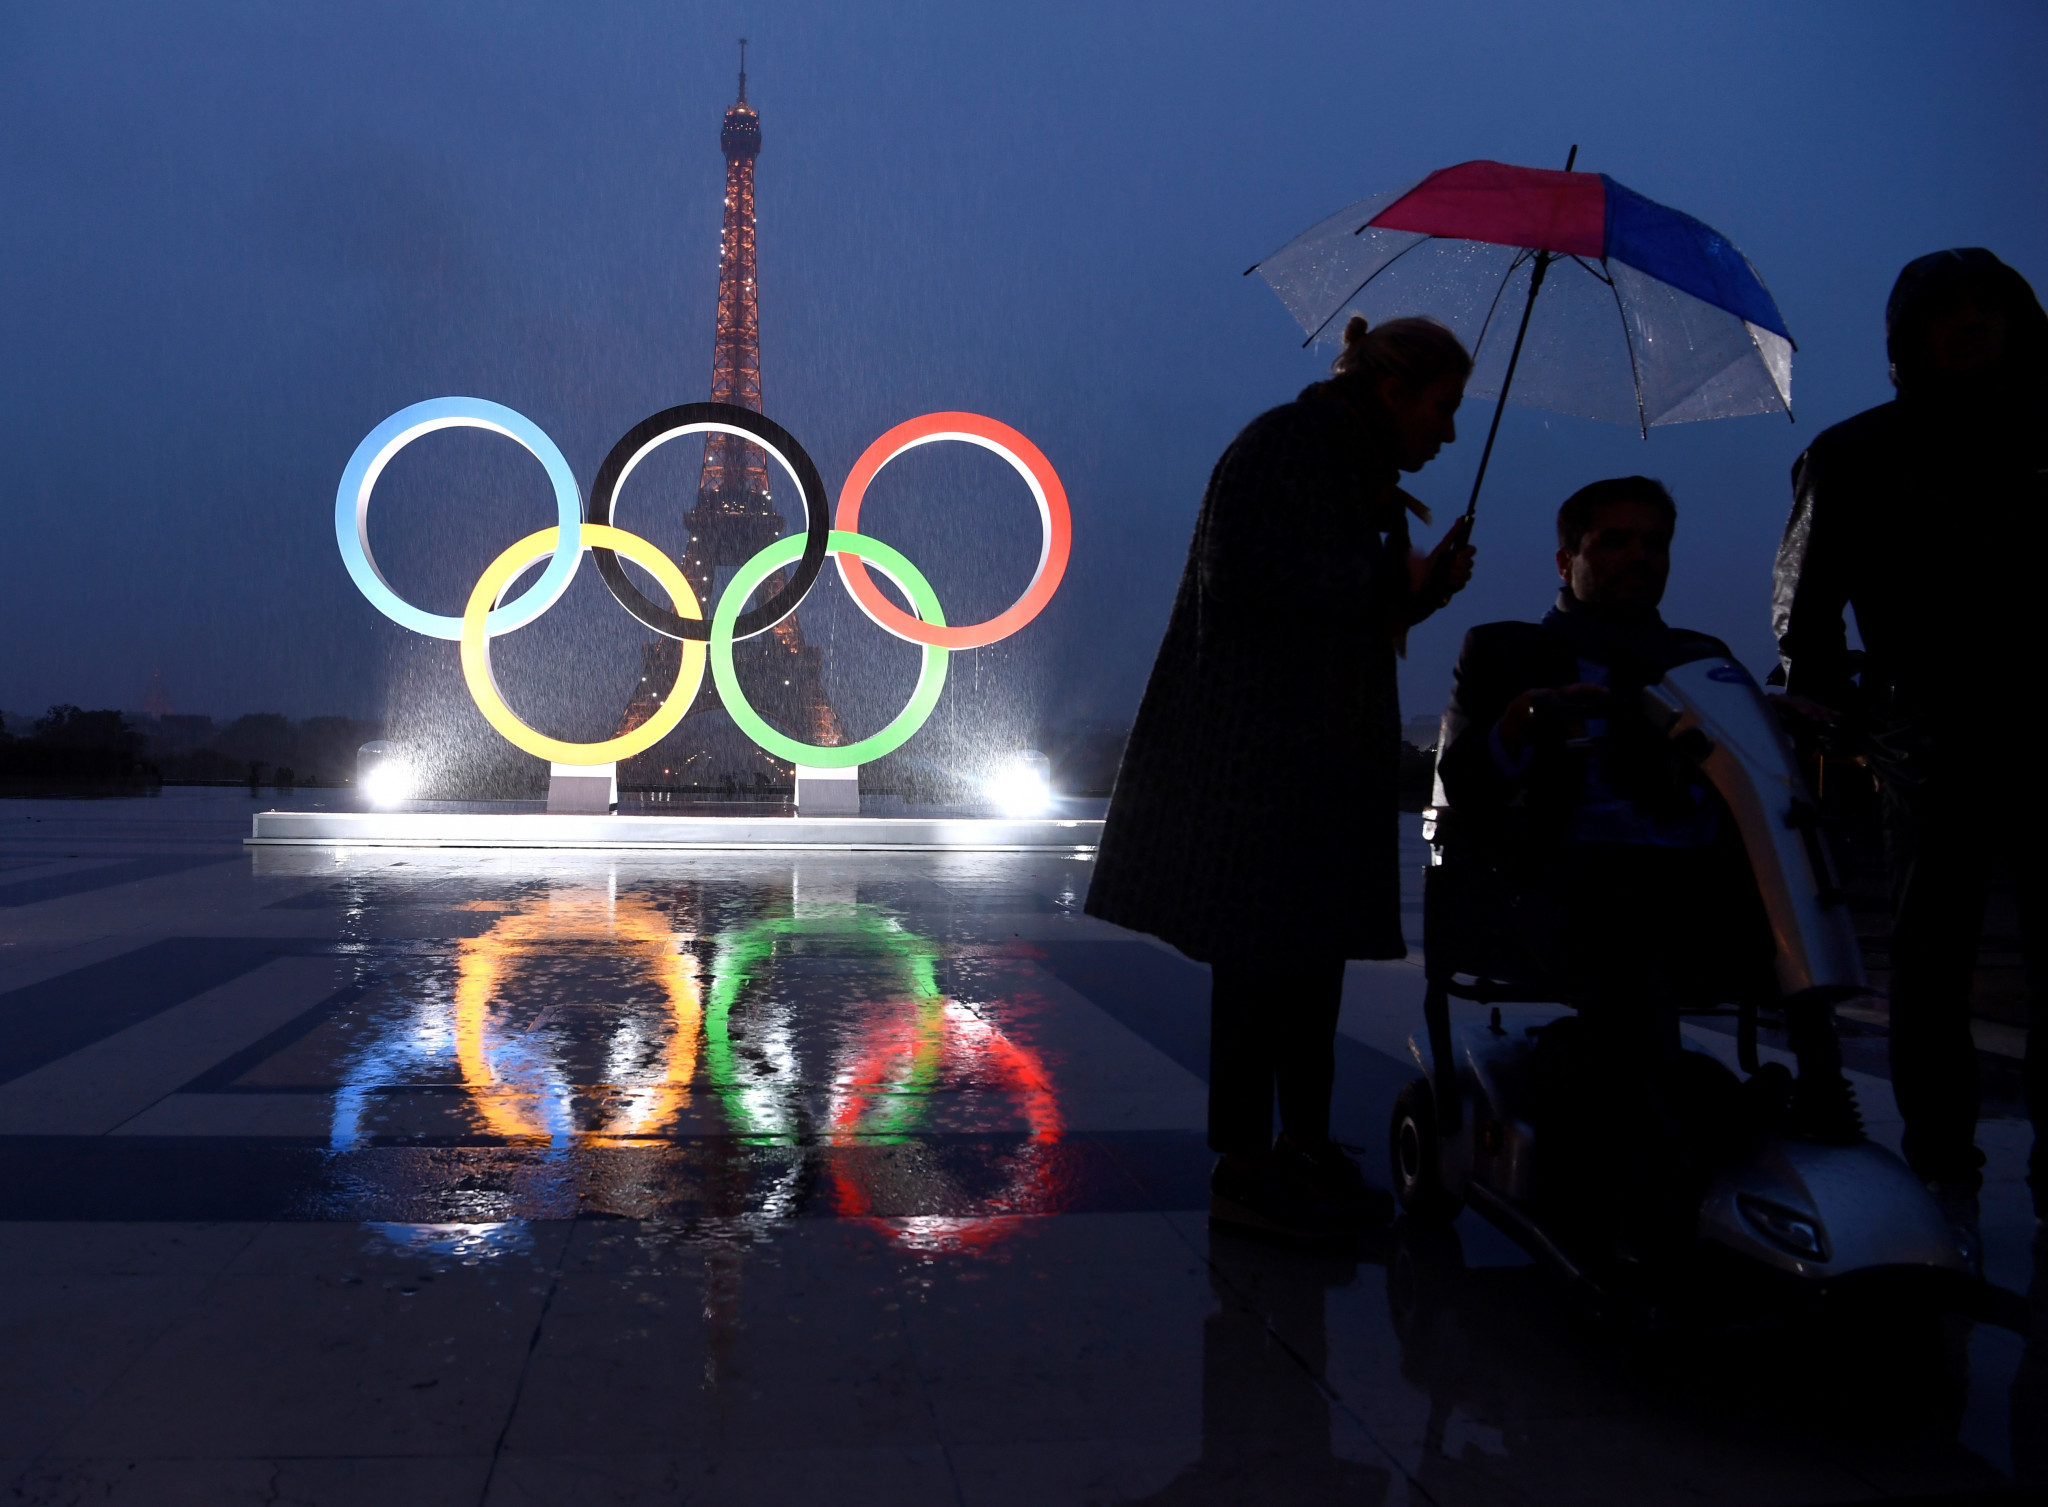 Survey says public support for Paris 2024 dwindling in France